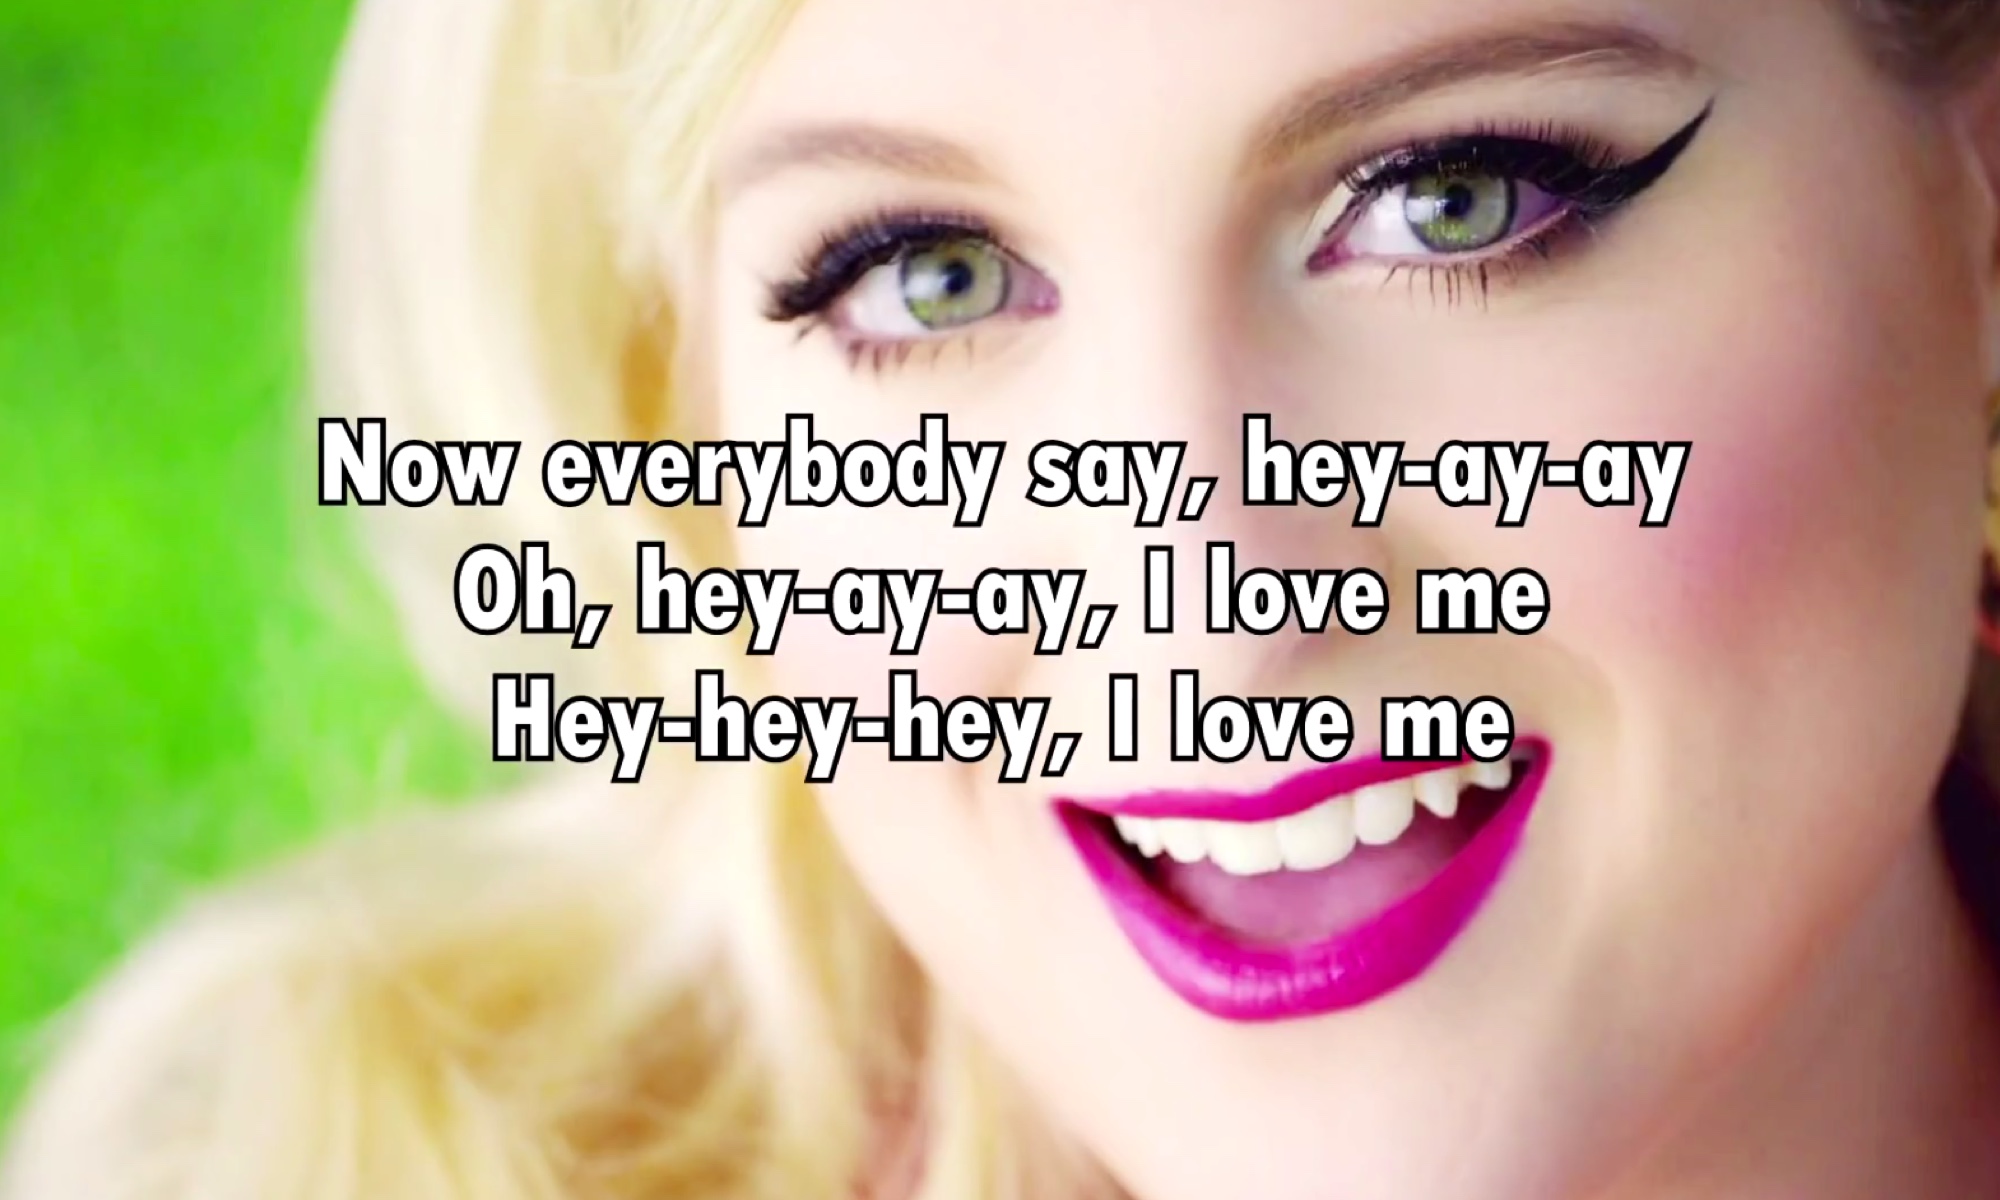 A still from Meghan Trainor's video, "I Love Me."